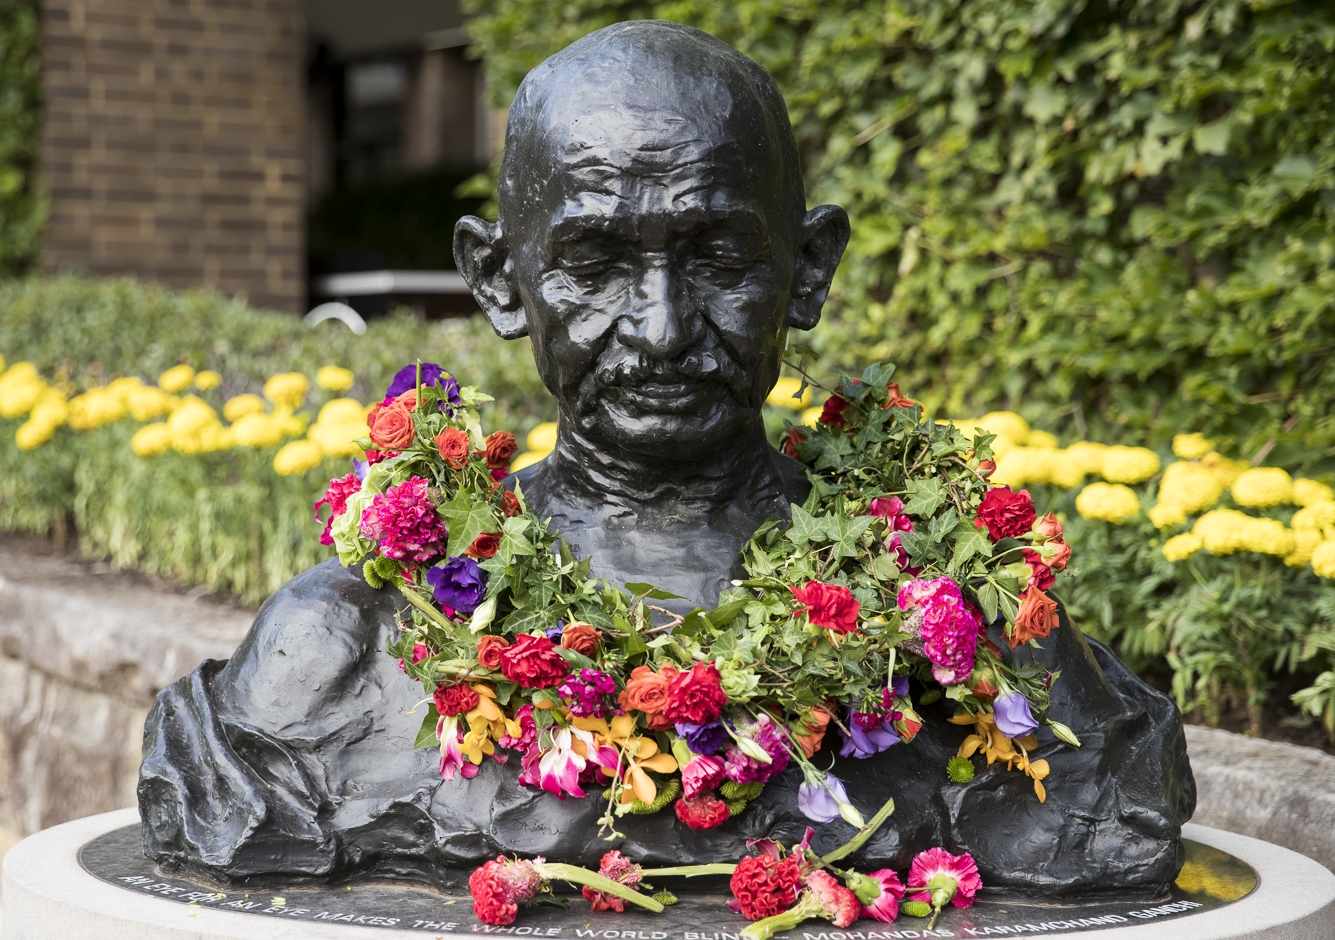 UNSW's annual lecture recognises Mahatma Gandhi's legacy as a champion of human rights.